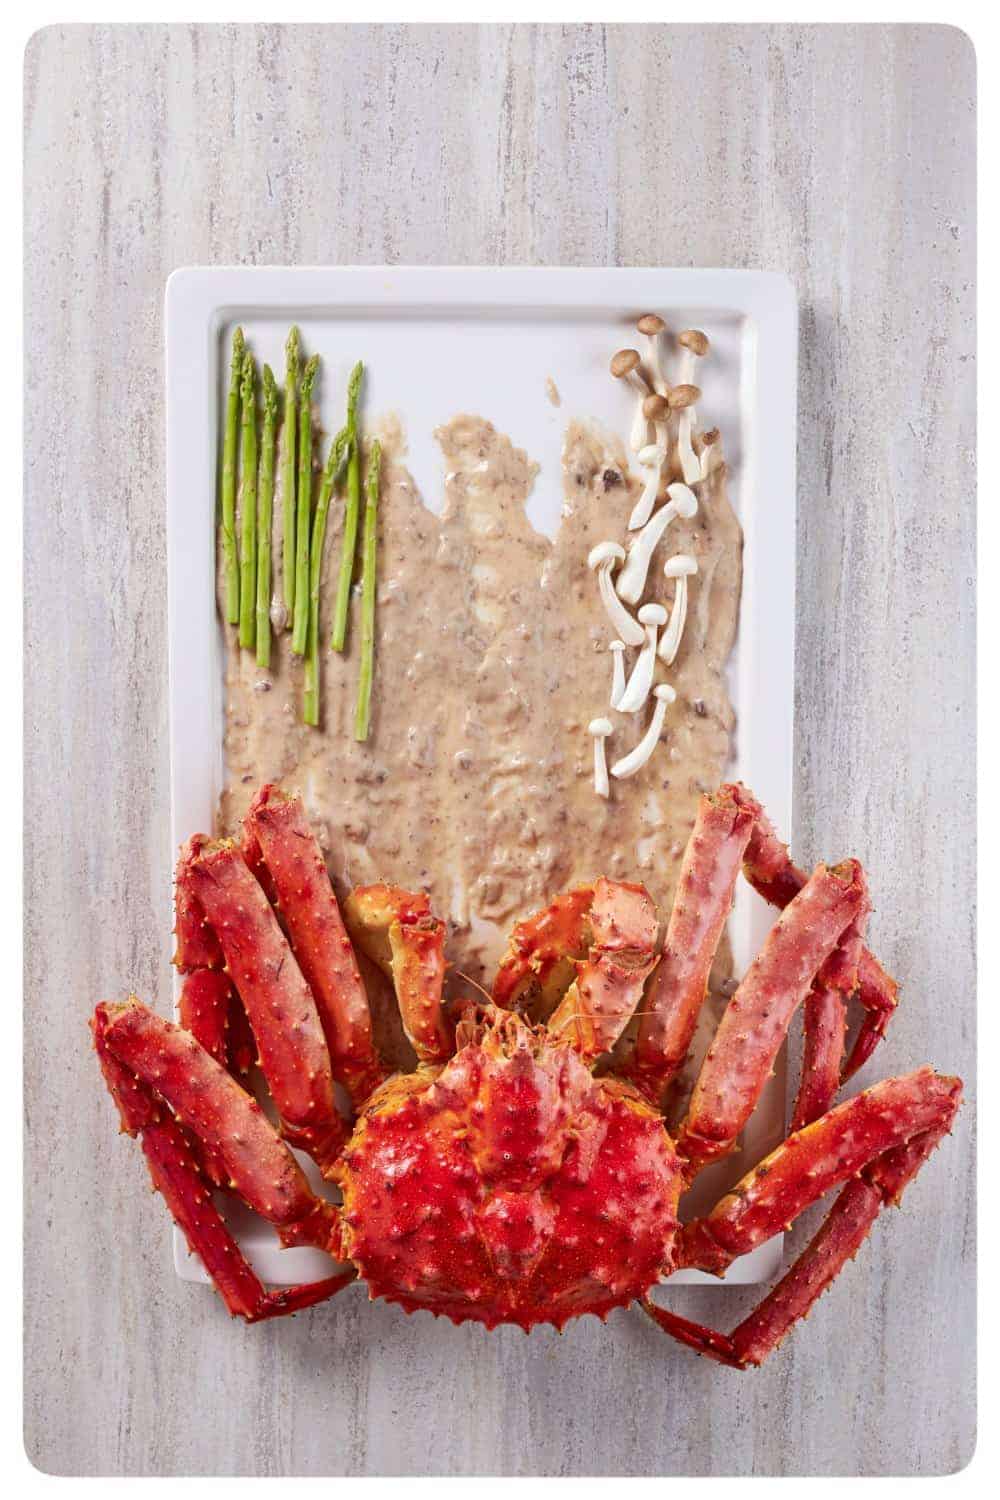 food stylist singapore the crab is laid out with asparagus and enoki mushrooms